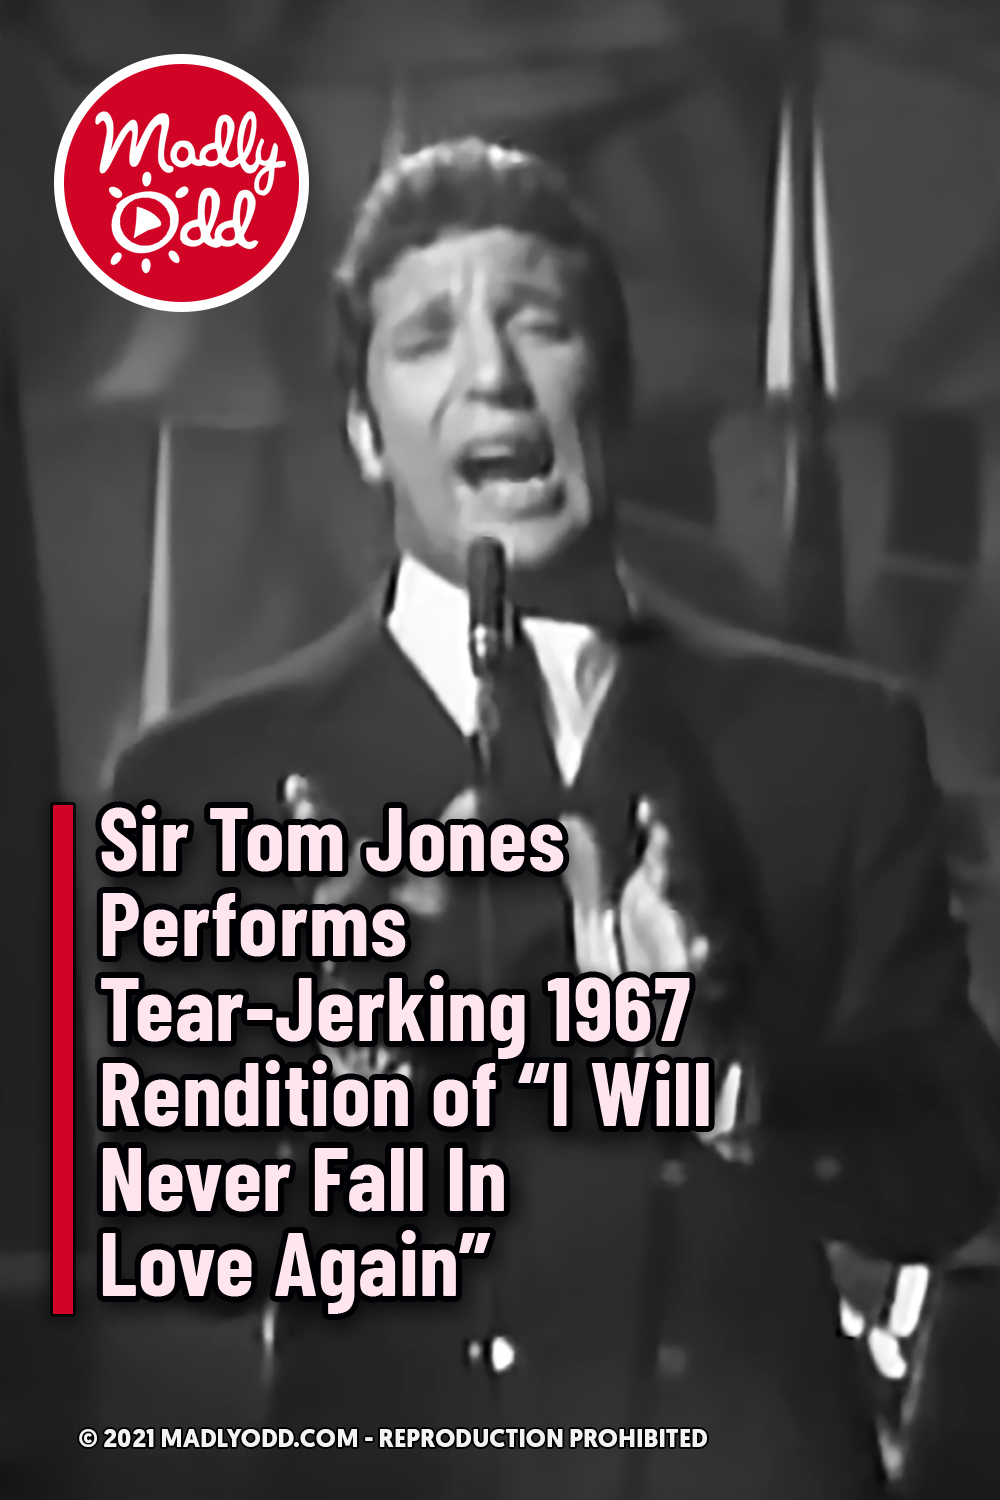 Sir Tom Jones Performs Tear-Jerking 1967 Rendition of “I Will Never Fall In Love Again”